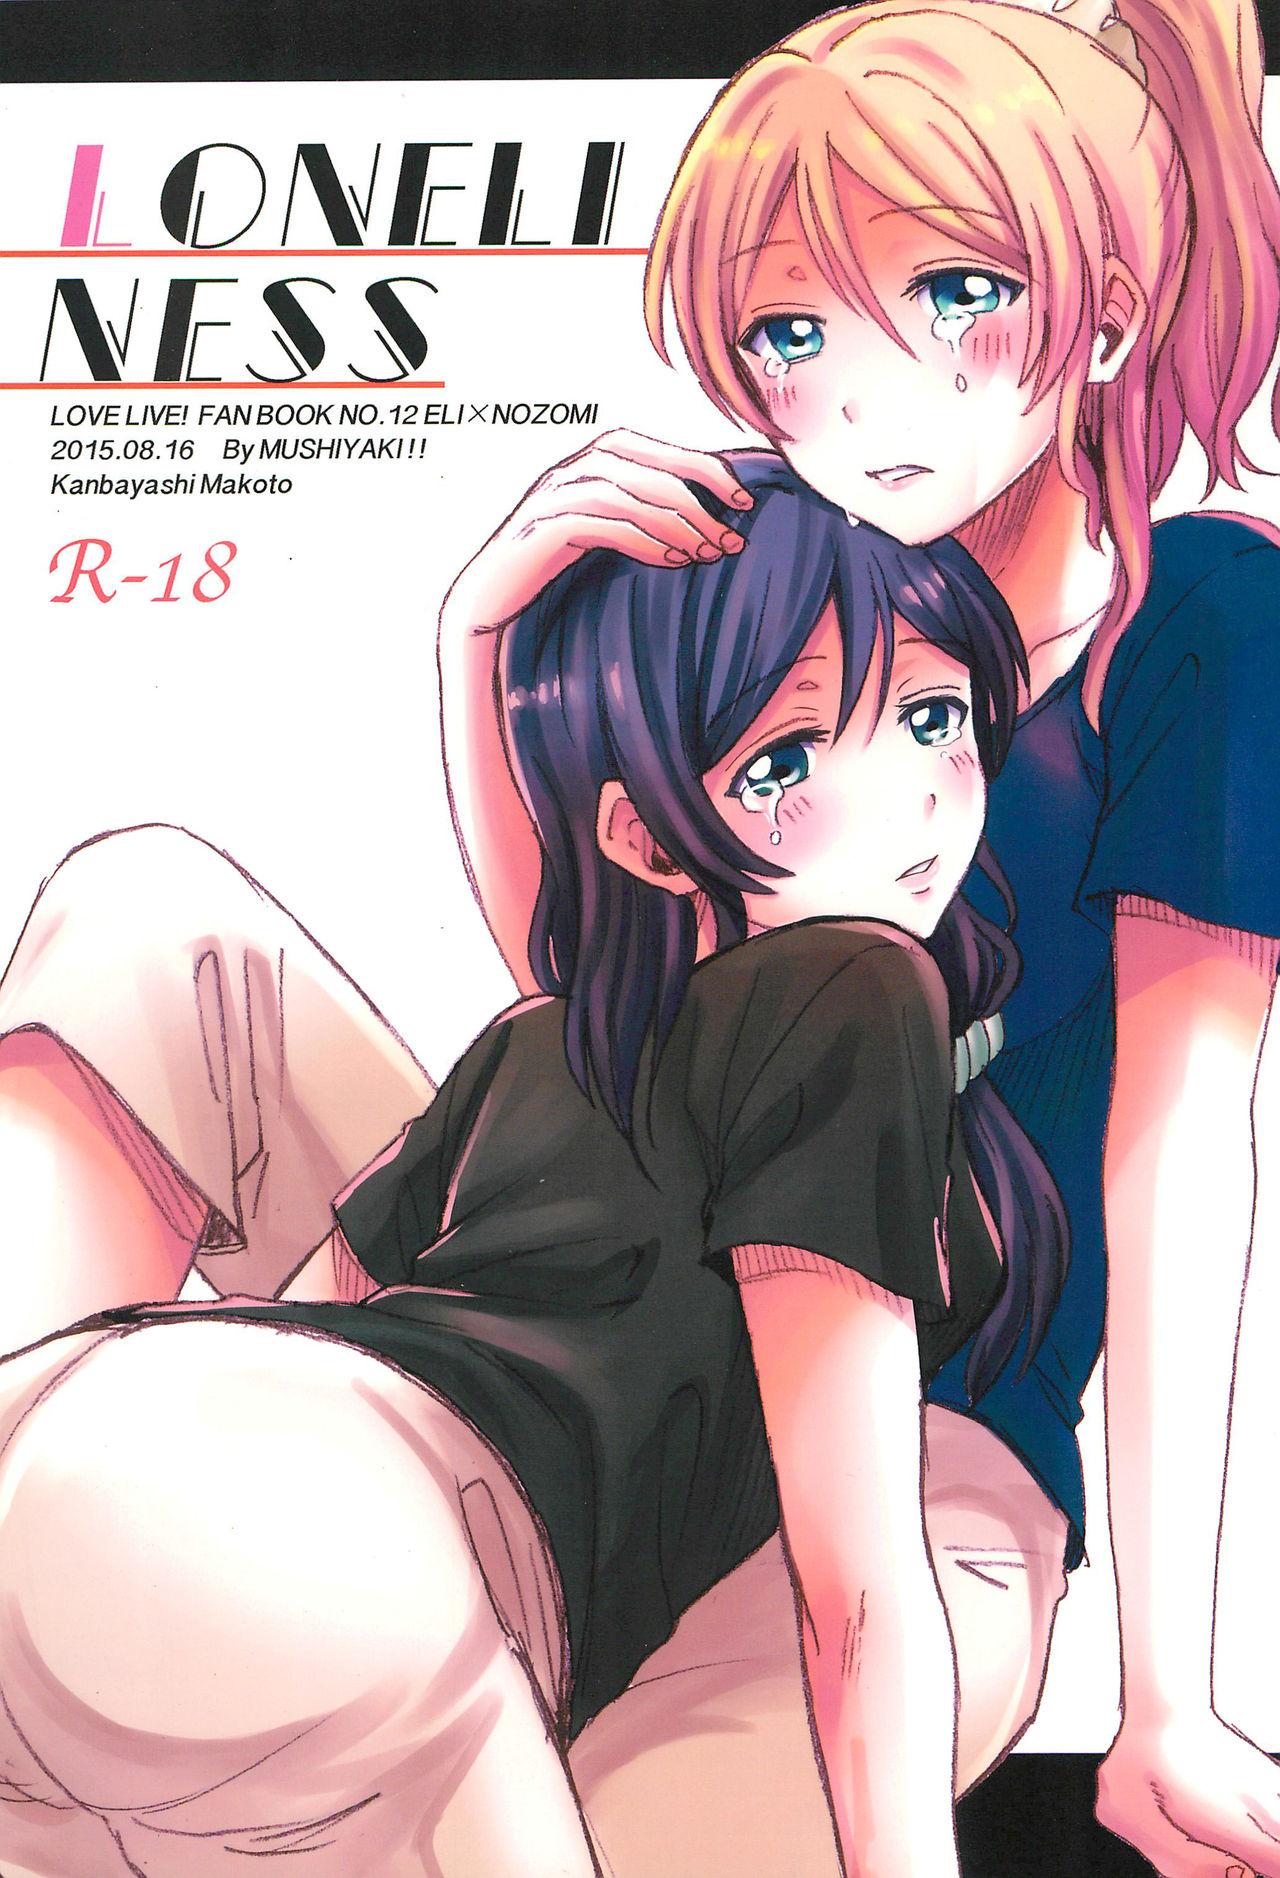 Highschool LONELINESS - Love live Pussy Sex - Picture 1